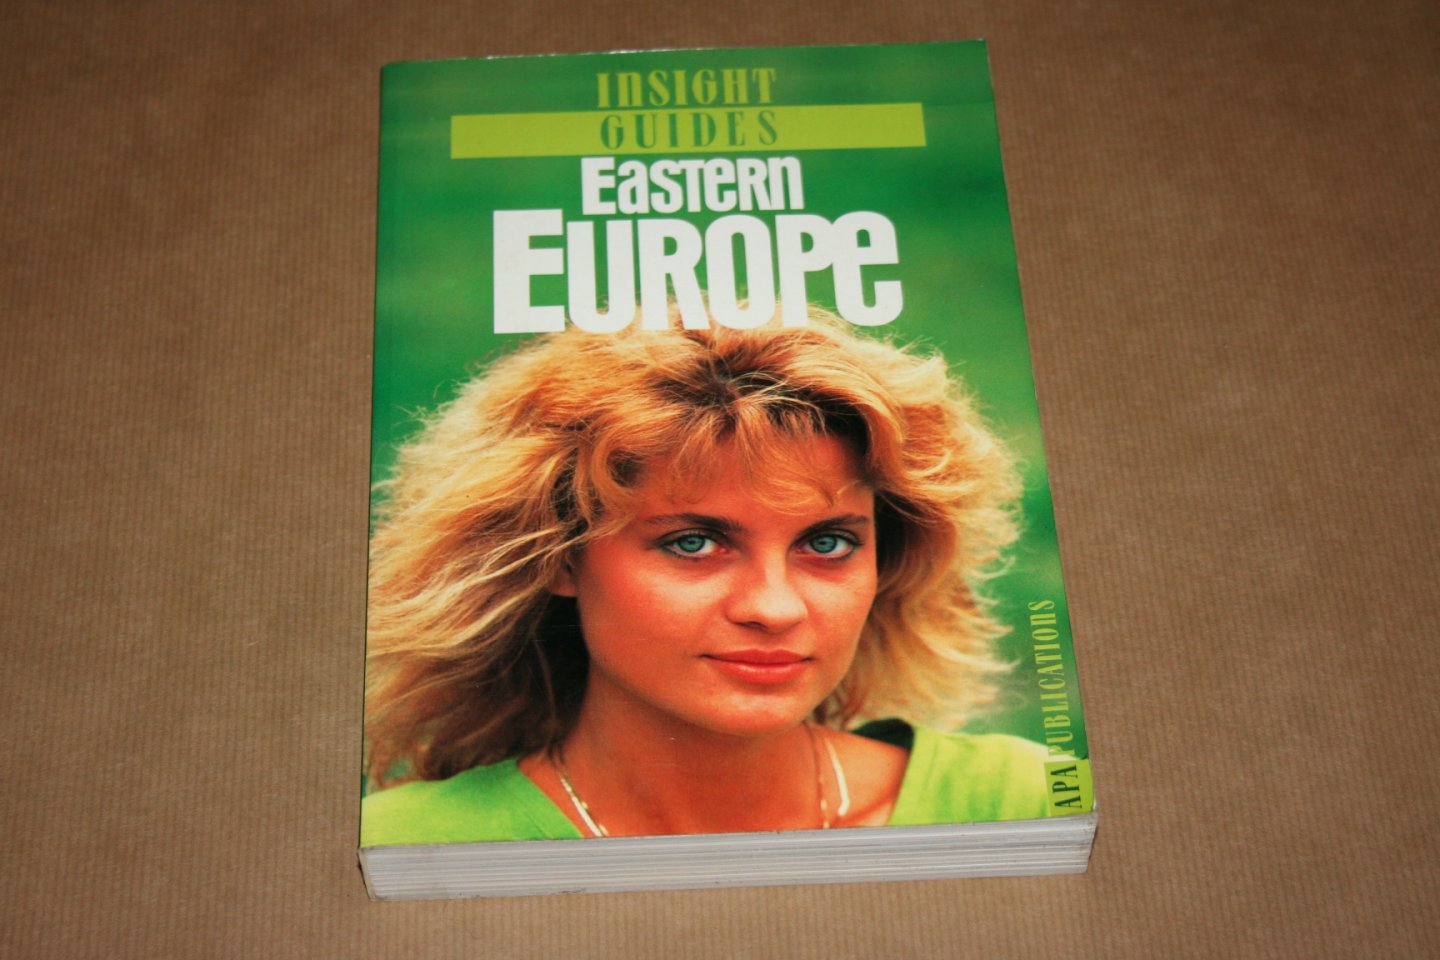 R. Carter - Eastern Europe - Insight Guides